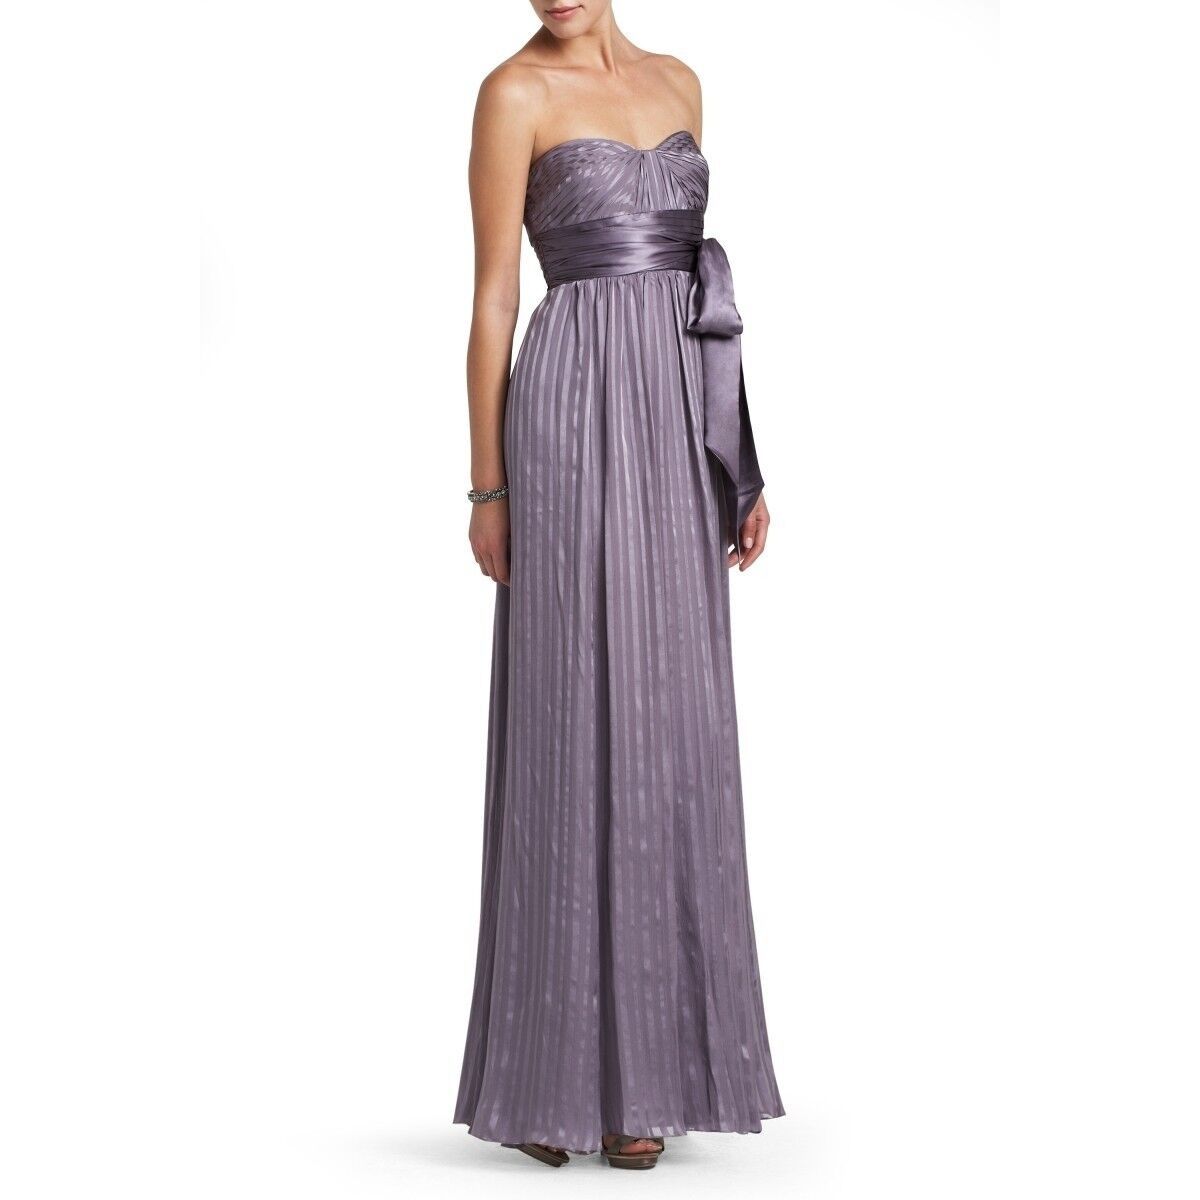 Style LUB6D989 BCBG MAXAZRIA Size 2 Strapless Satin Purple Floor Length Maxi on Queenly